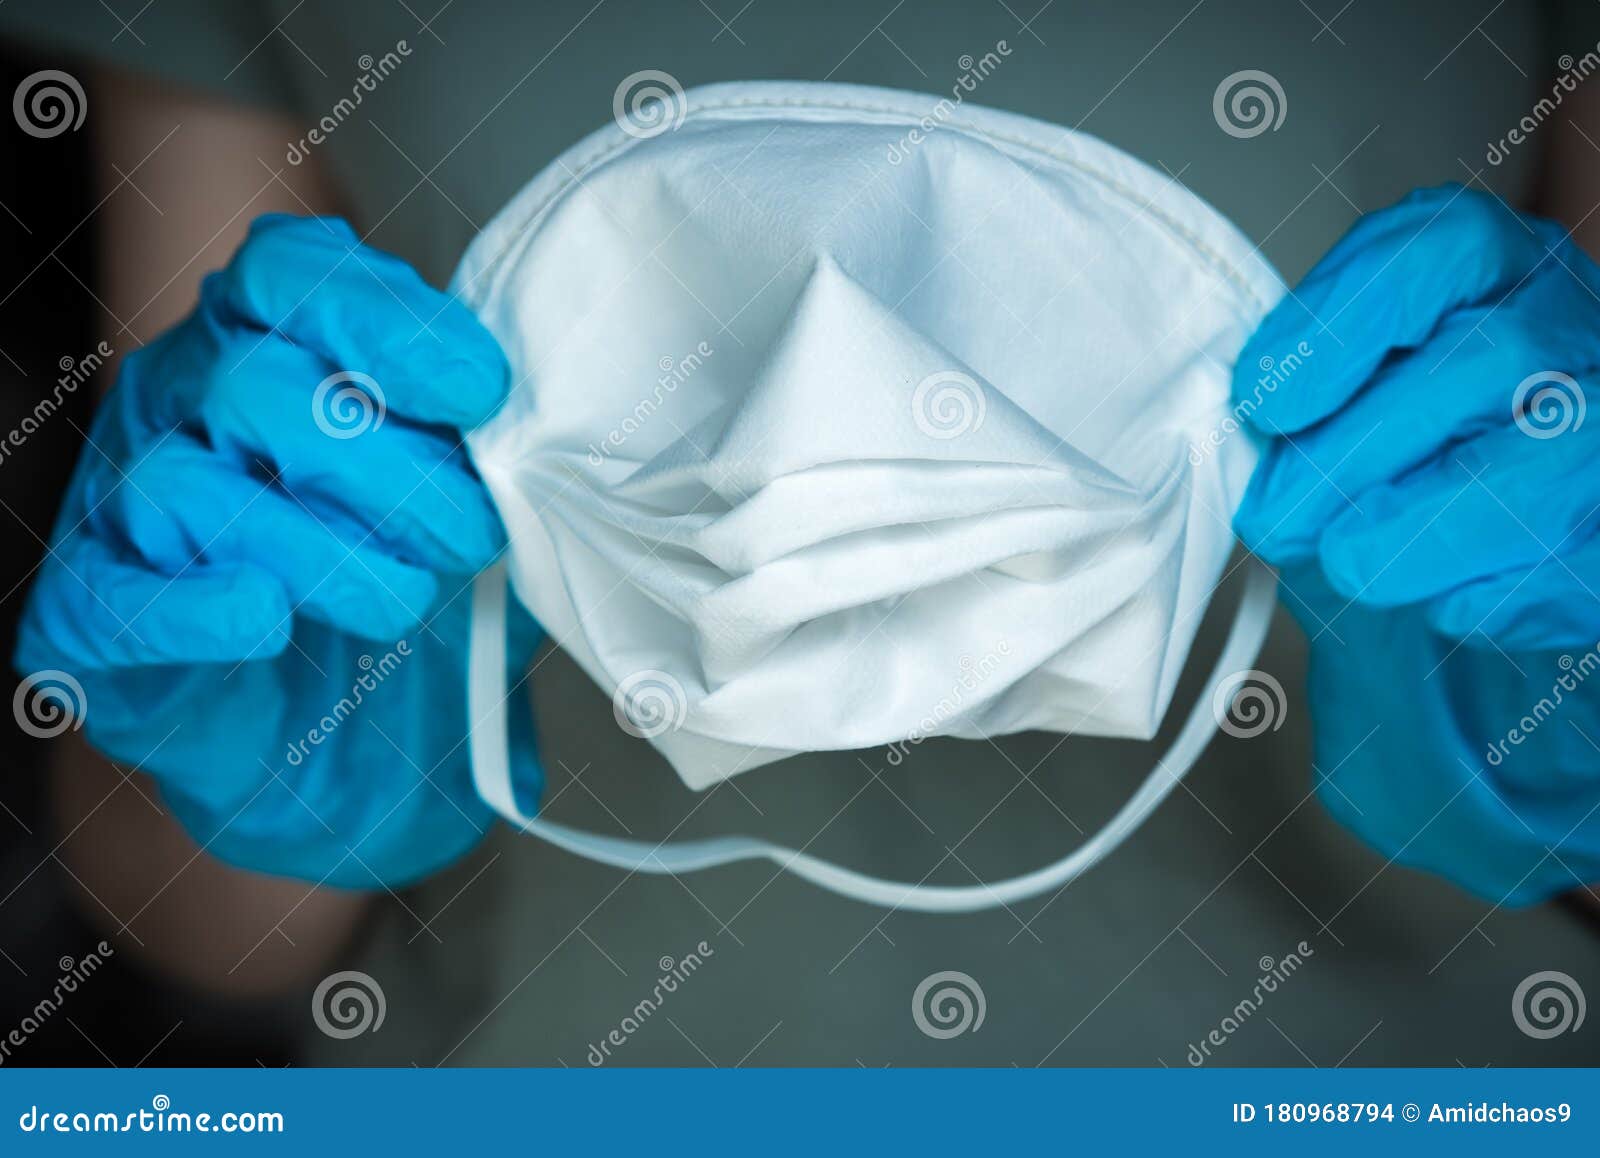 Closeup Of Hands Wearing Surgical Gloves And Holdin